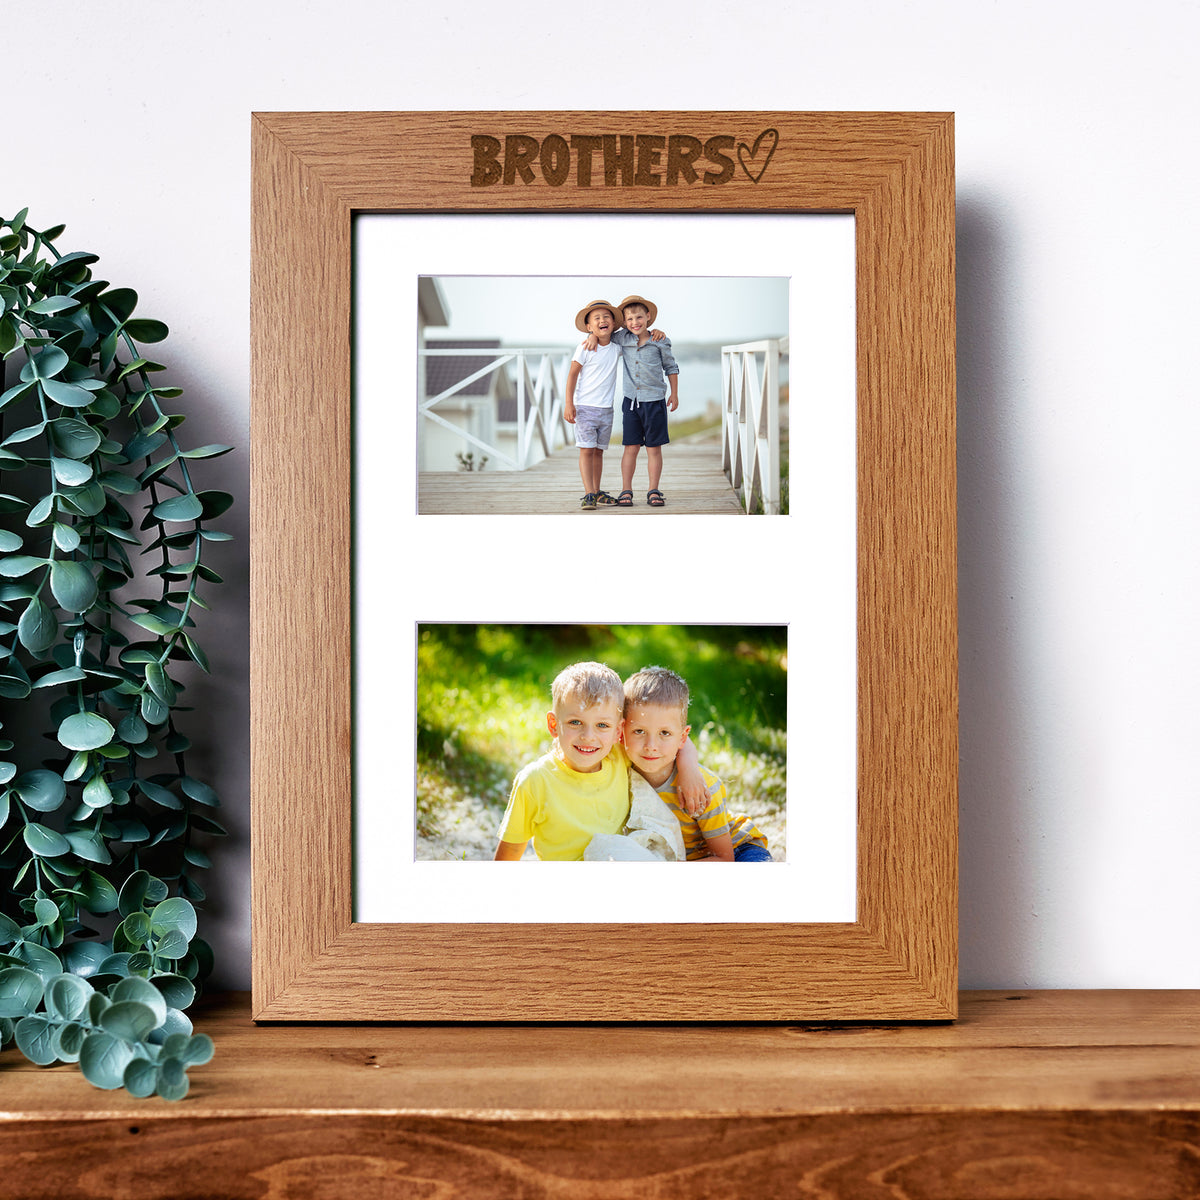 Brothers Photo Picture Frame Double 6x4 Inch Landscape